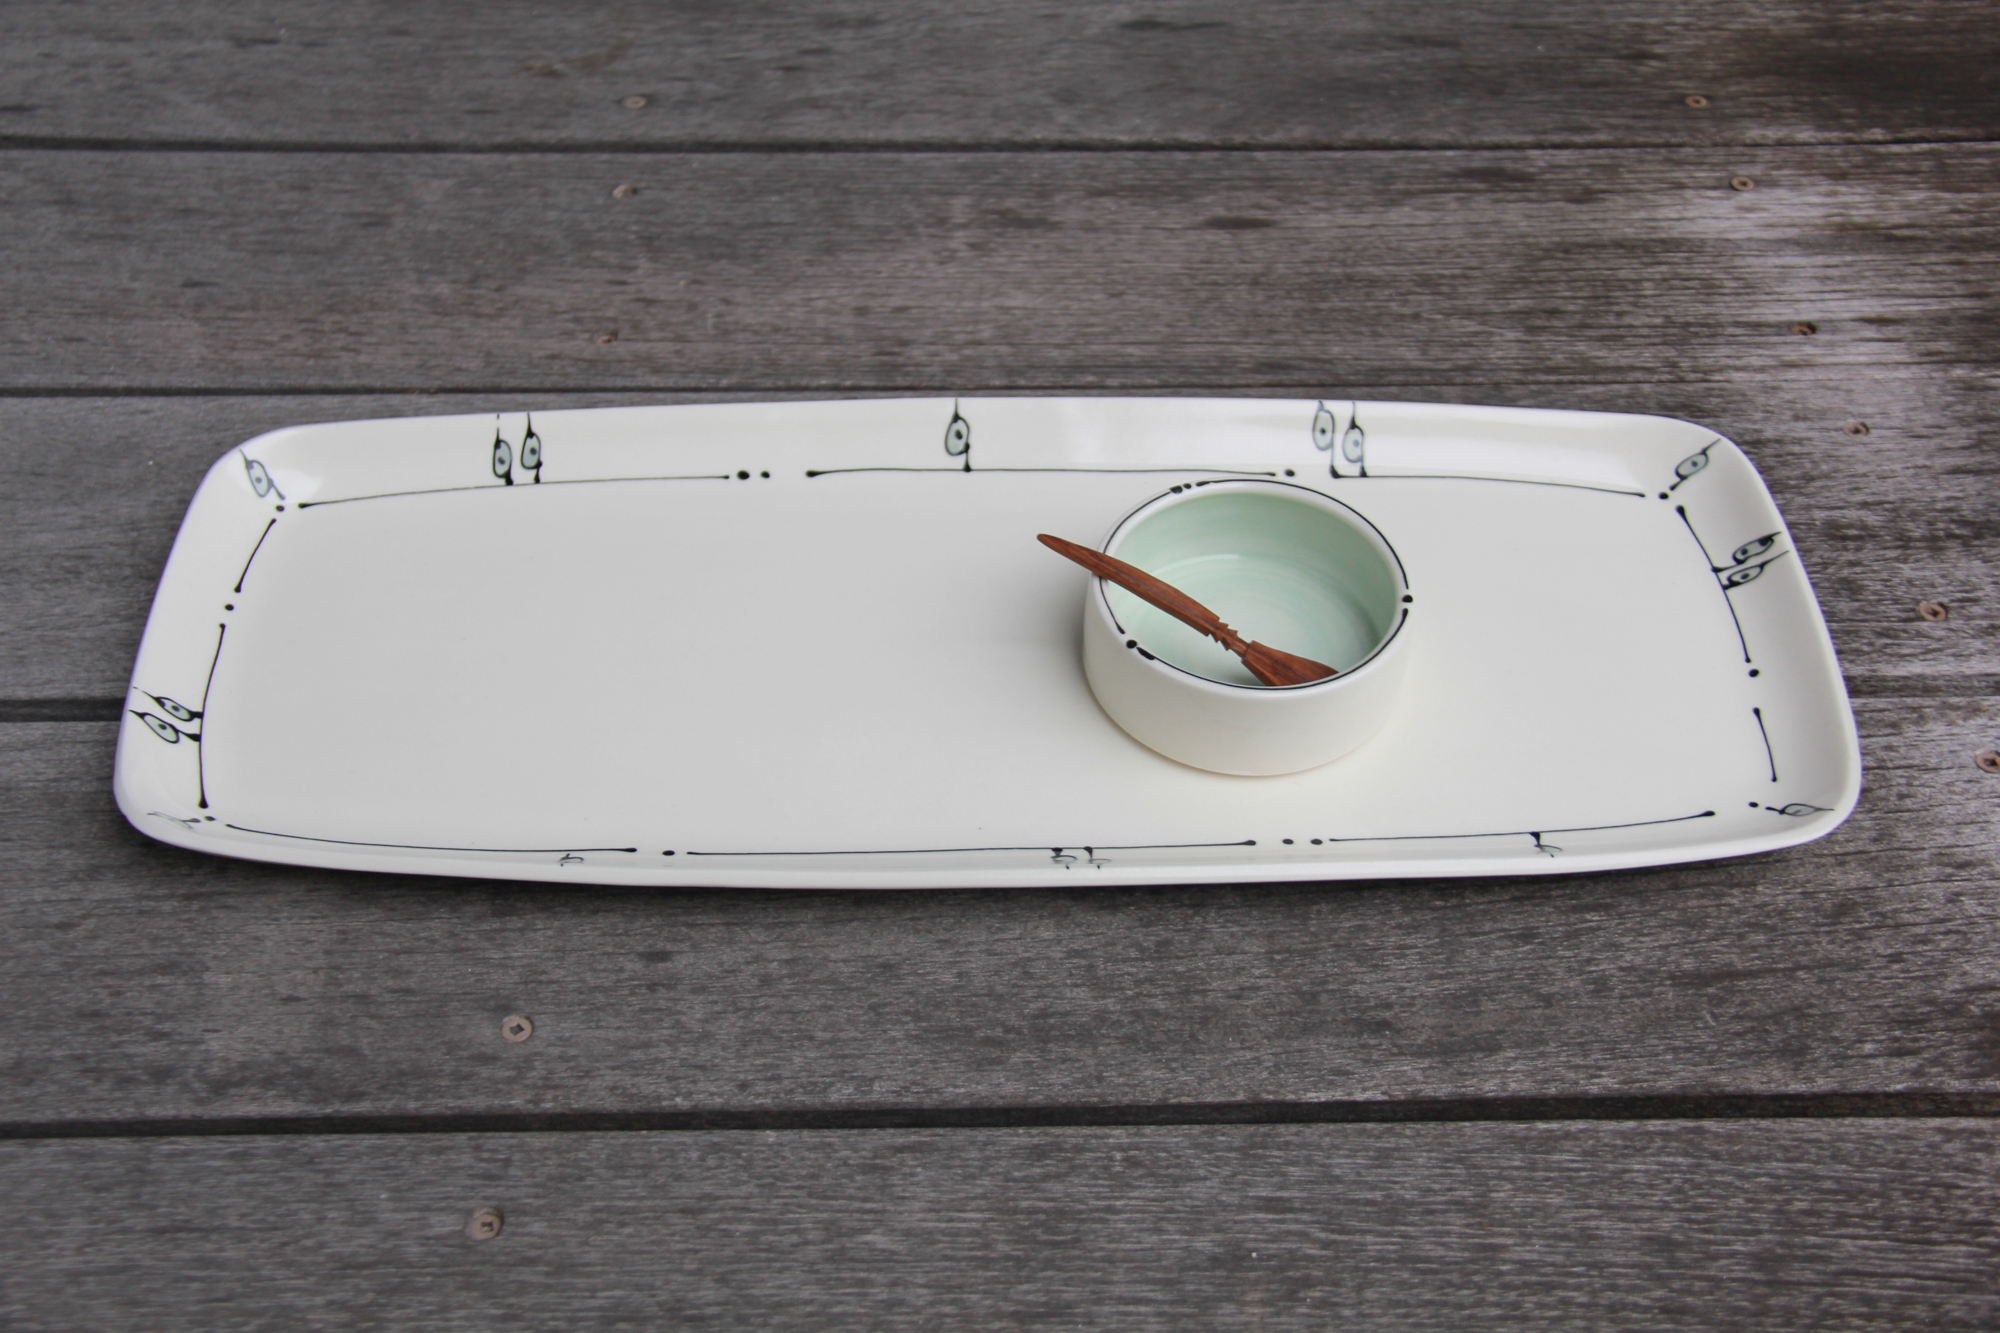 Iris Dorton: Large Tray with Circle Dot Motif, comes with Wood Spoon and Dish Product Image 6 of 7